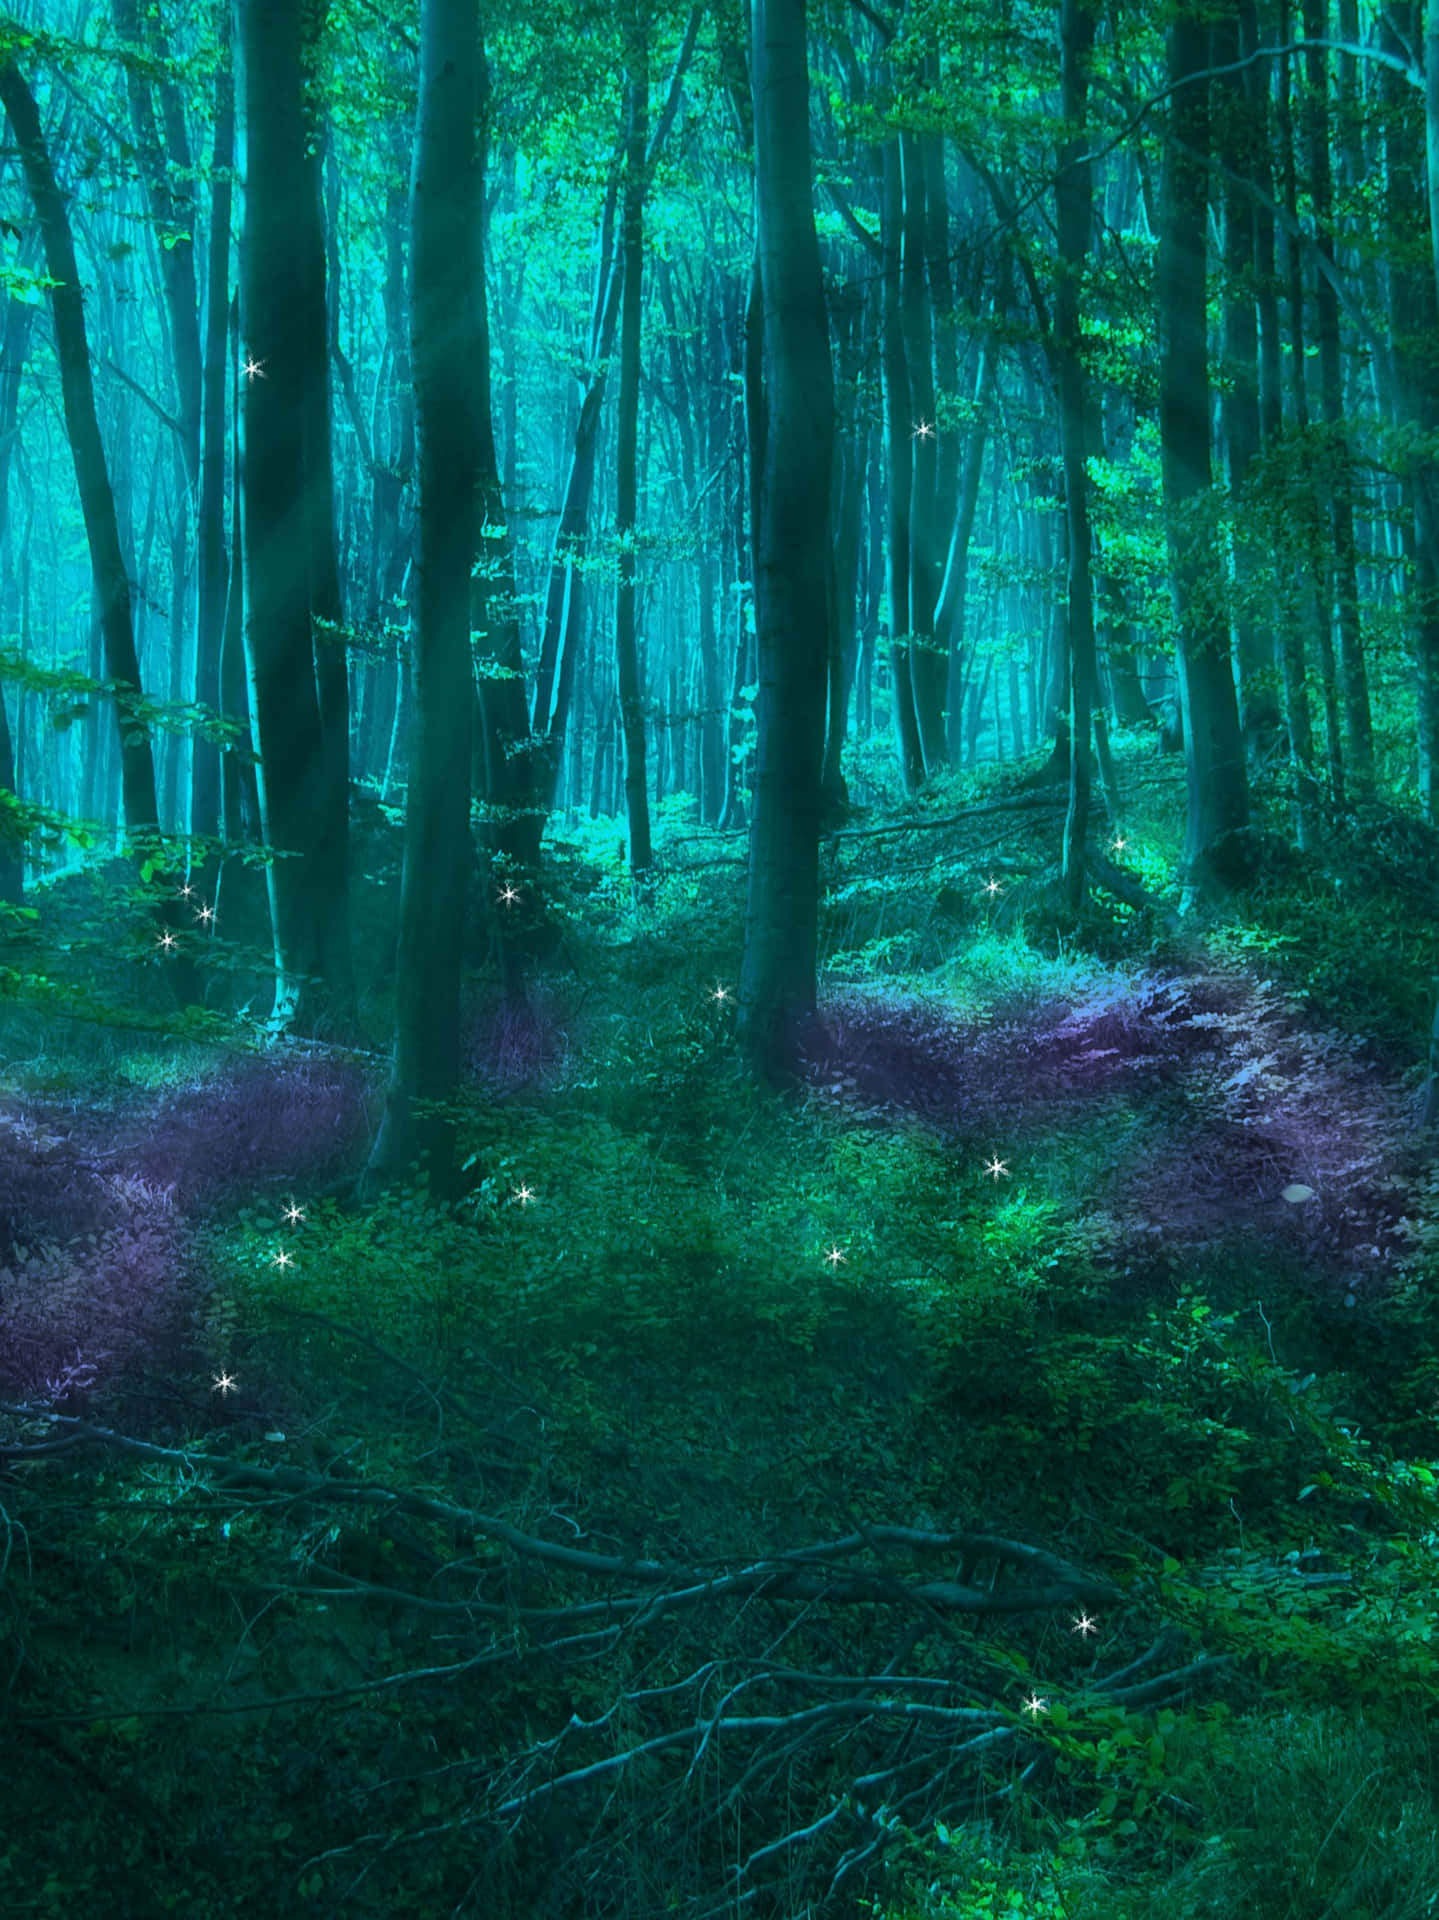 Enter the Magical Fairy Forest Wallpaper